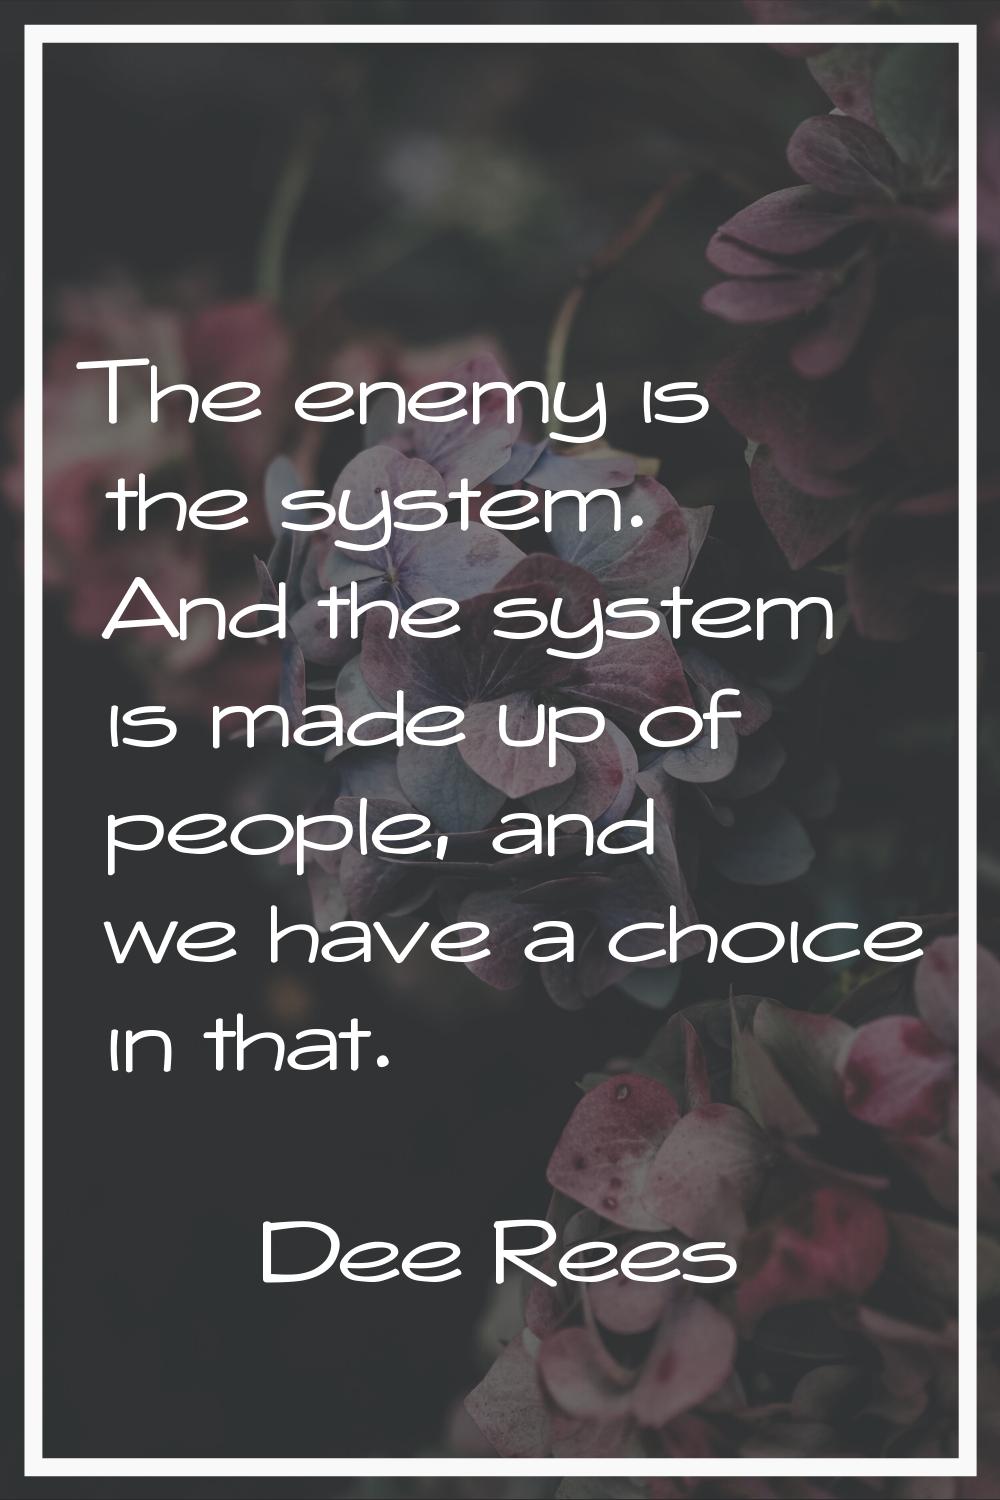 The enemy is the system. And the system is made up of people, and we have a choice in that.